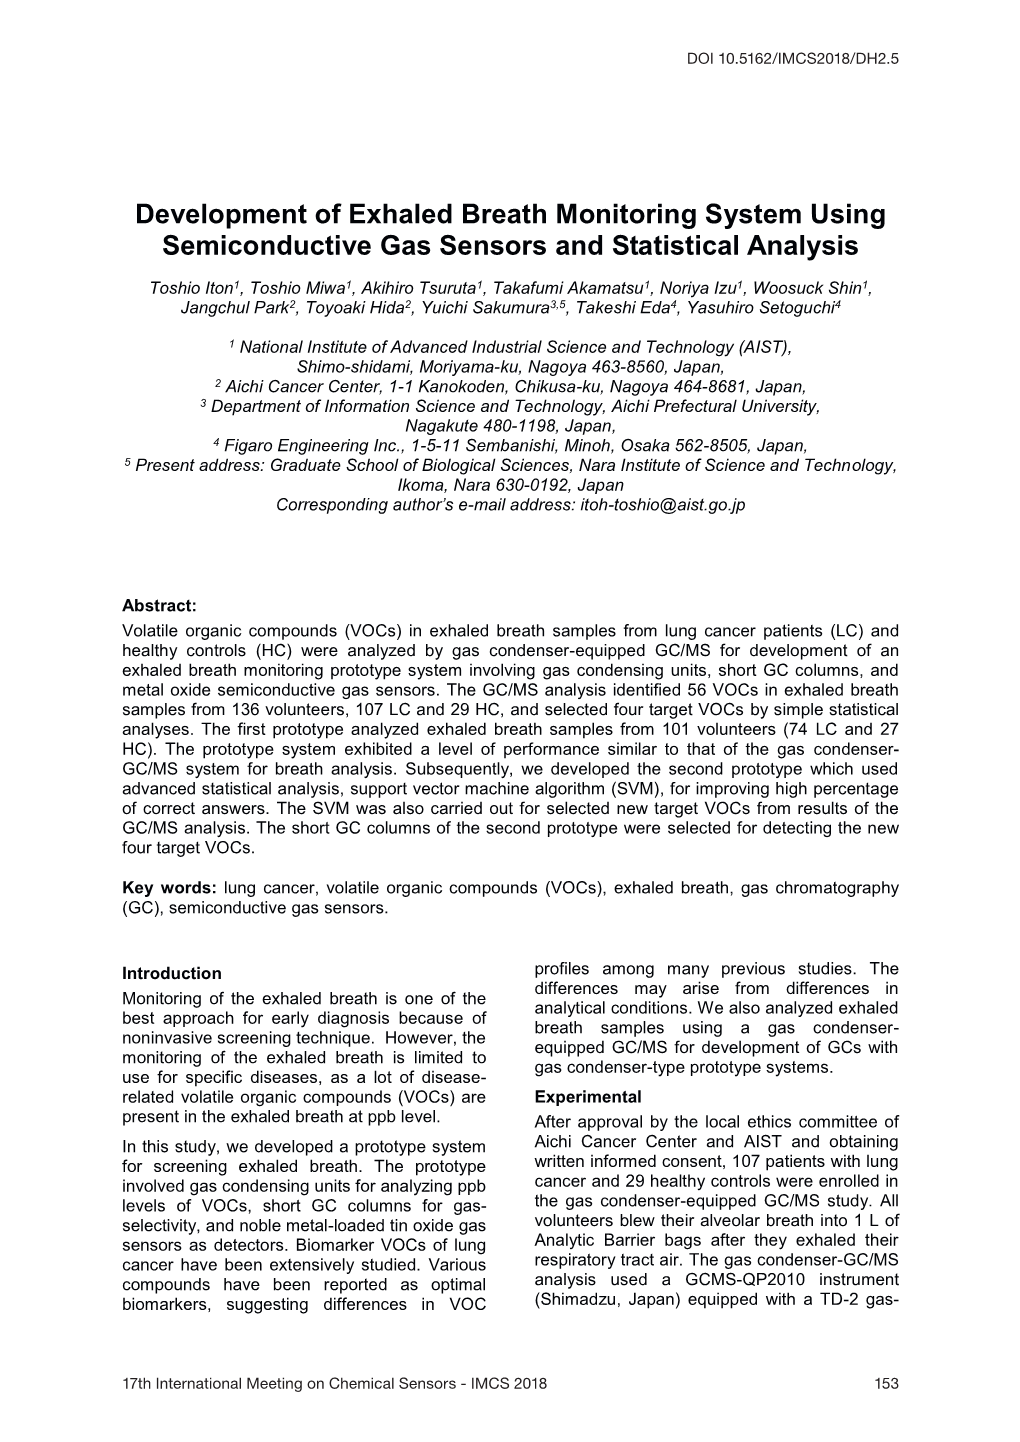 Development of Exhaled Breath Monitoring System Using Semiconductive Gas Sensors and Statistical Analysis